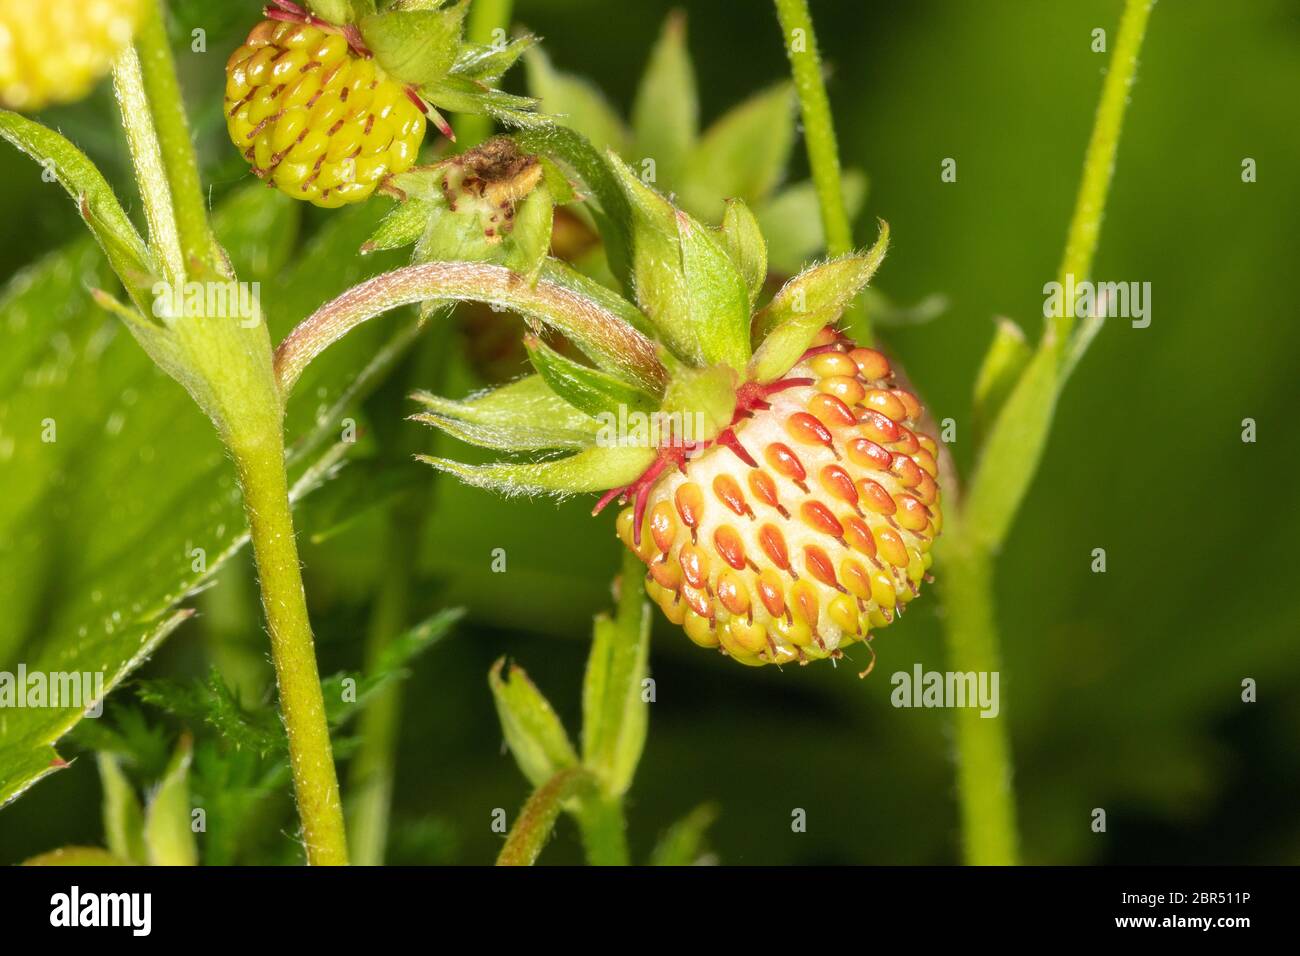 The fruit of Fragaria vesca, commonly called wild strawberry or woodland strawberry Stock Photo